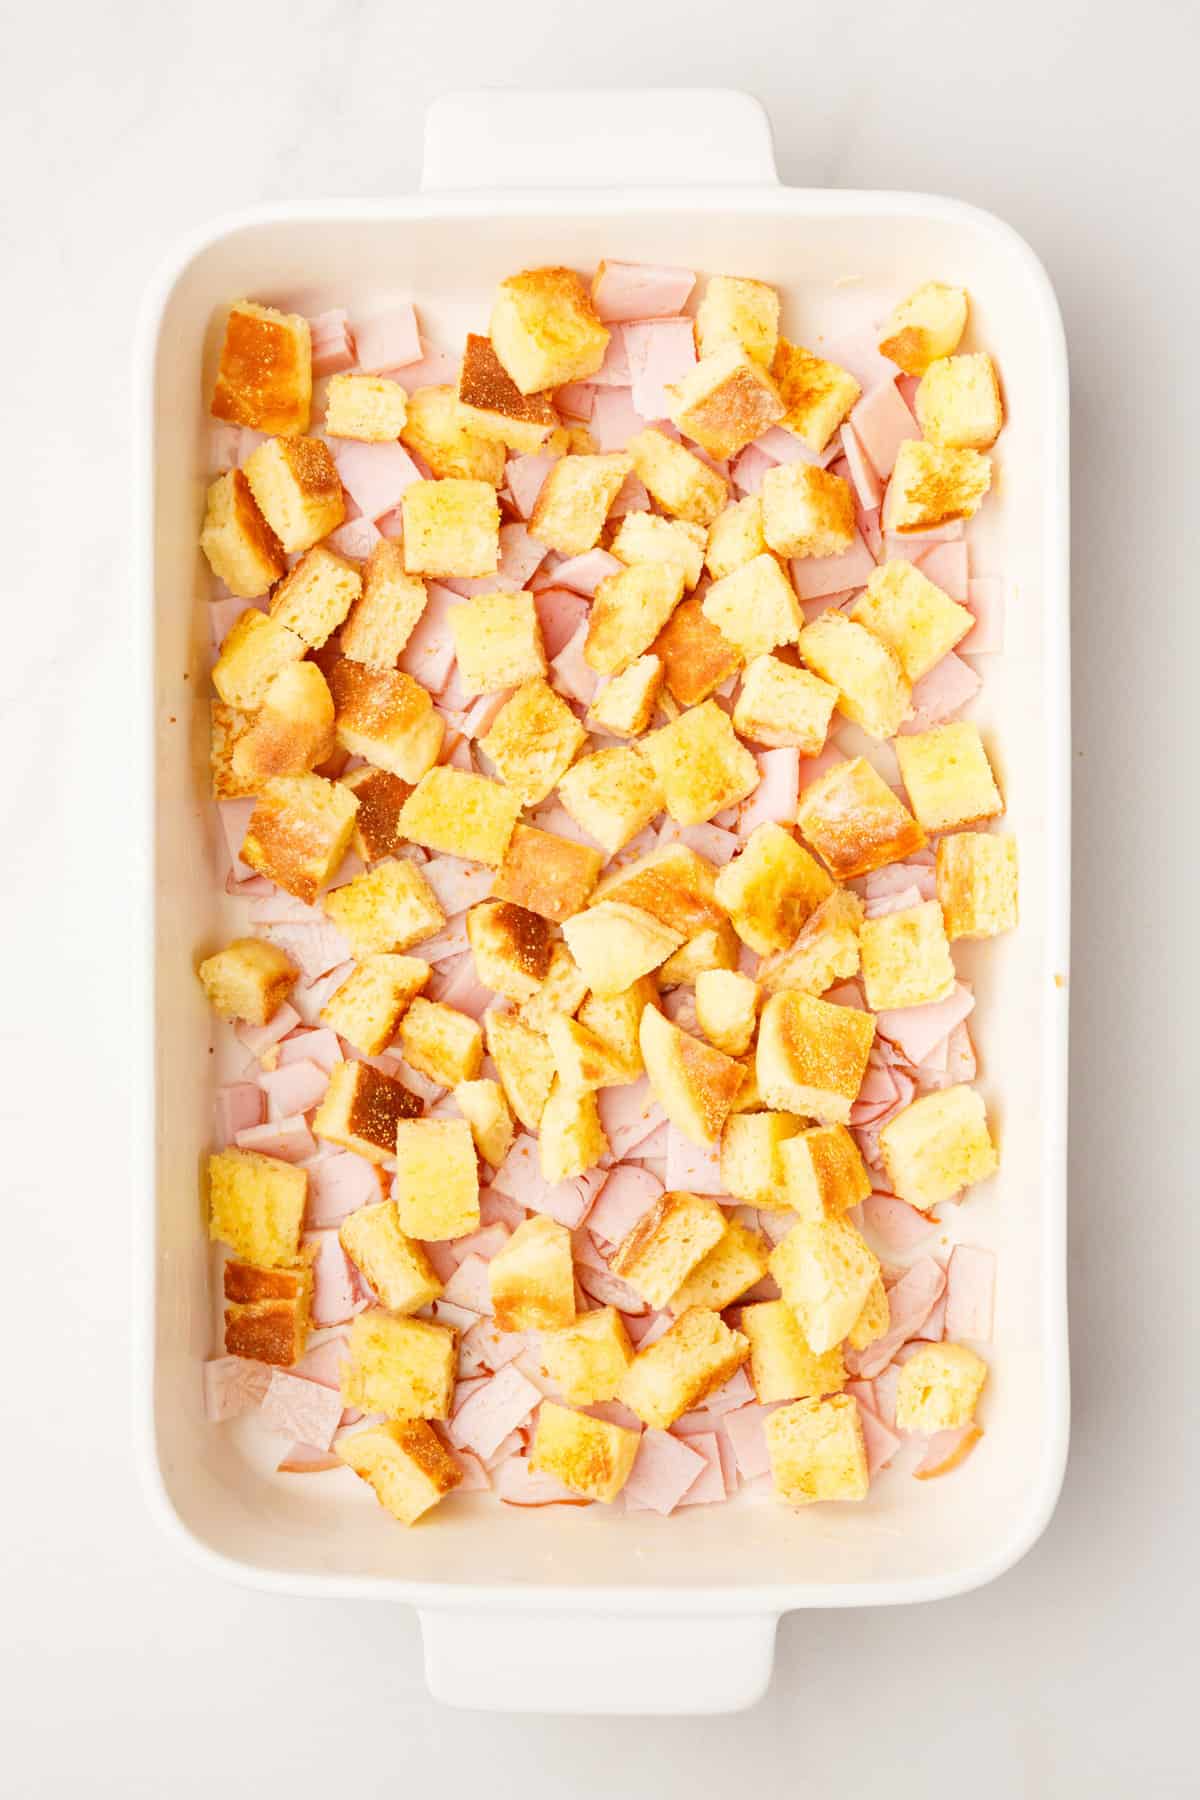 chopped canadian bacon pieces and the cubed english muffin pieces layering the bottom of a 9x13 casserole dish. 